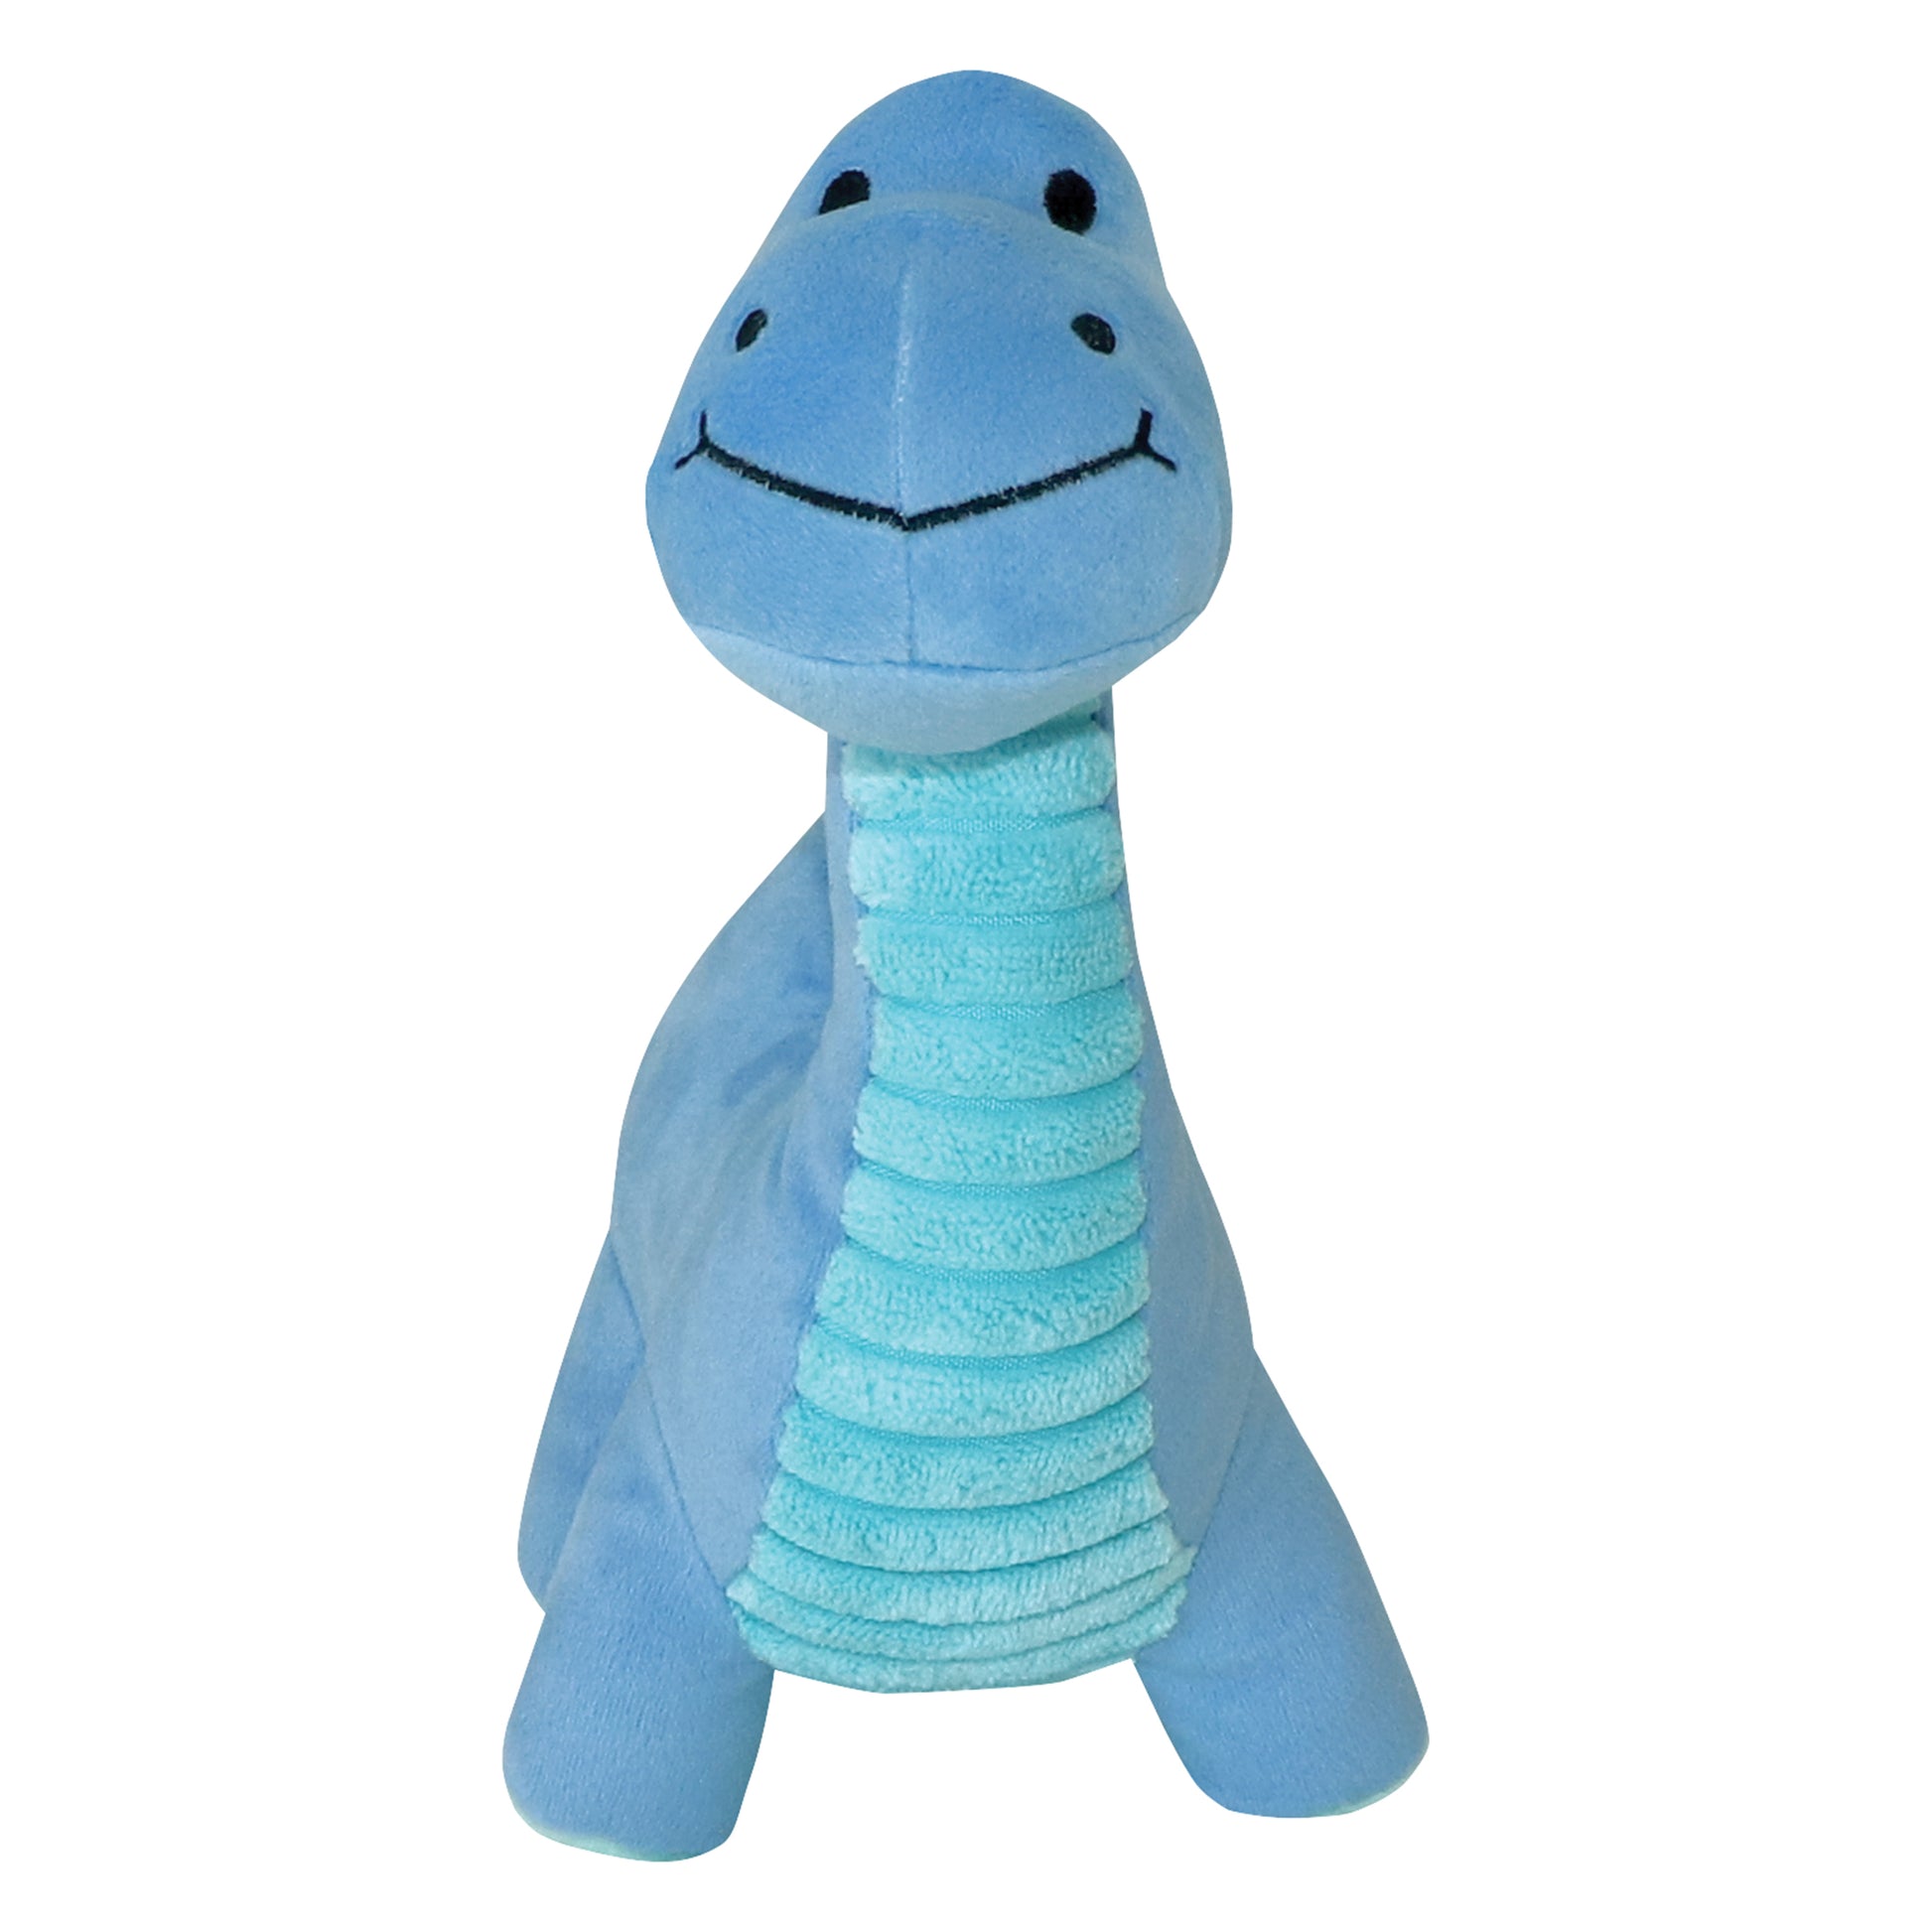 Dinosaur 9in Plush Toy Blue - front view